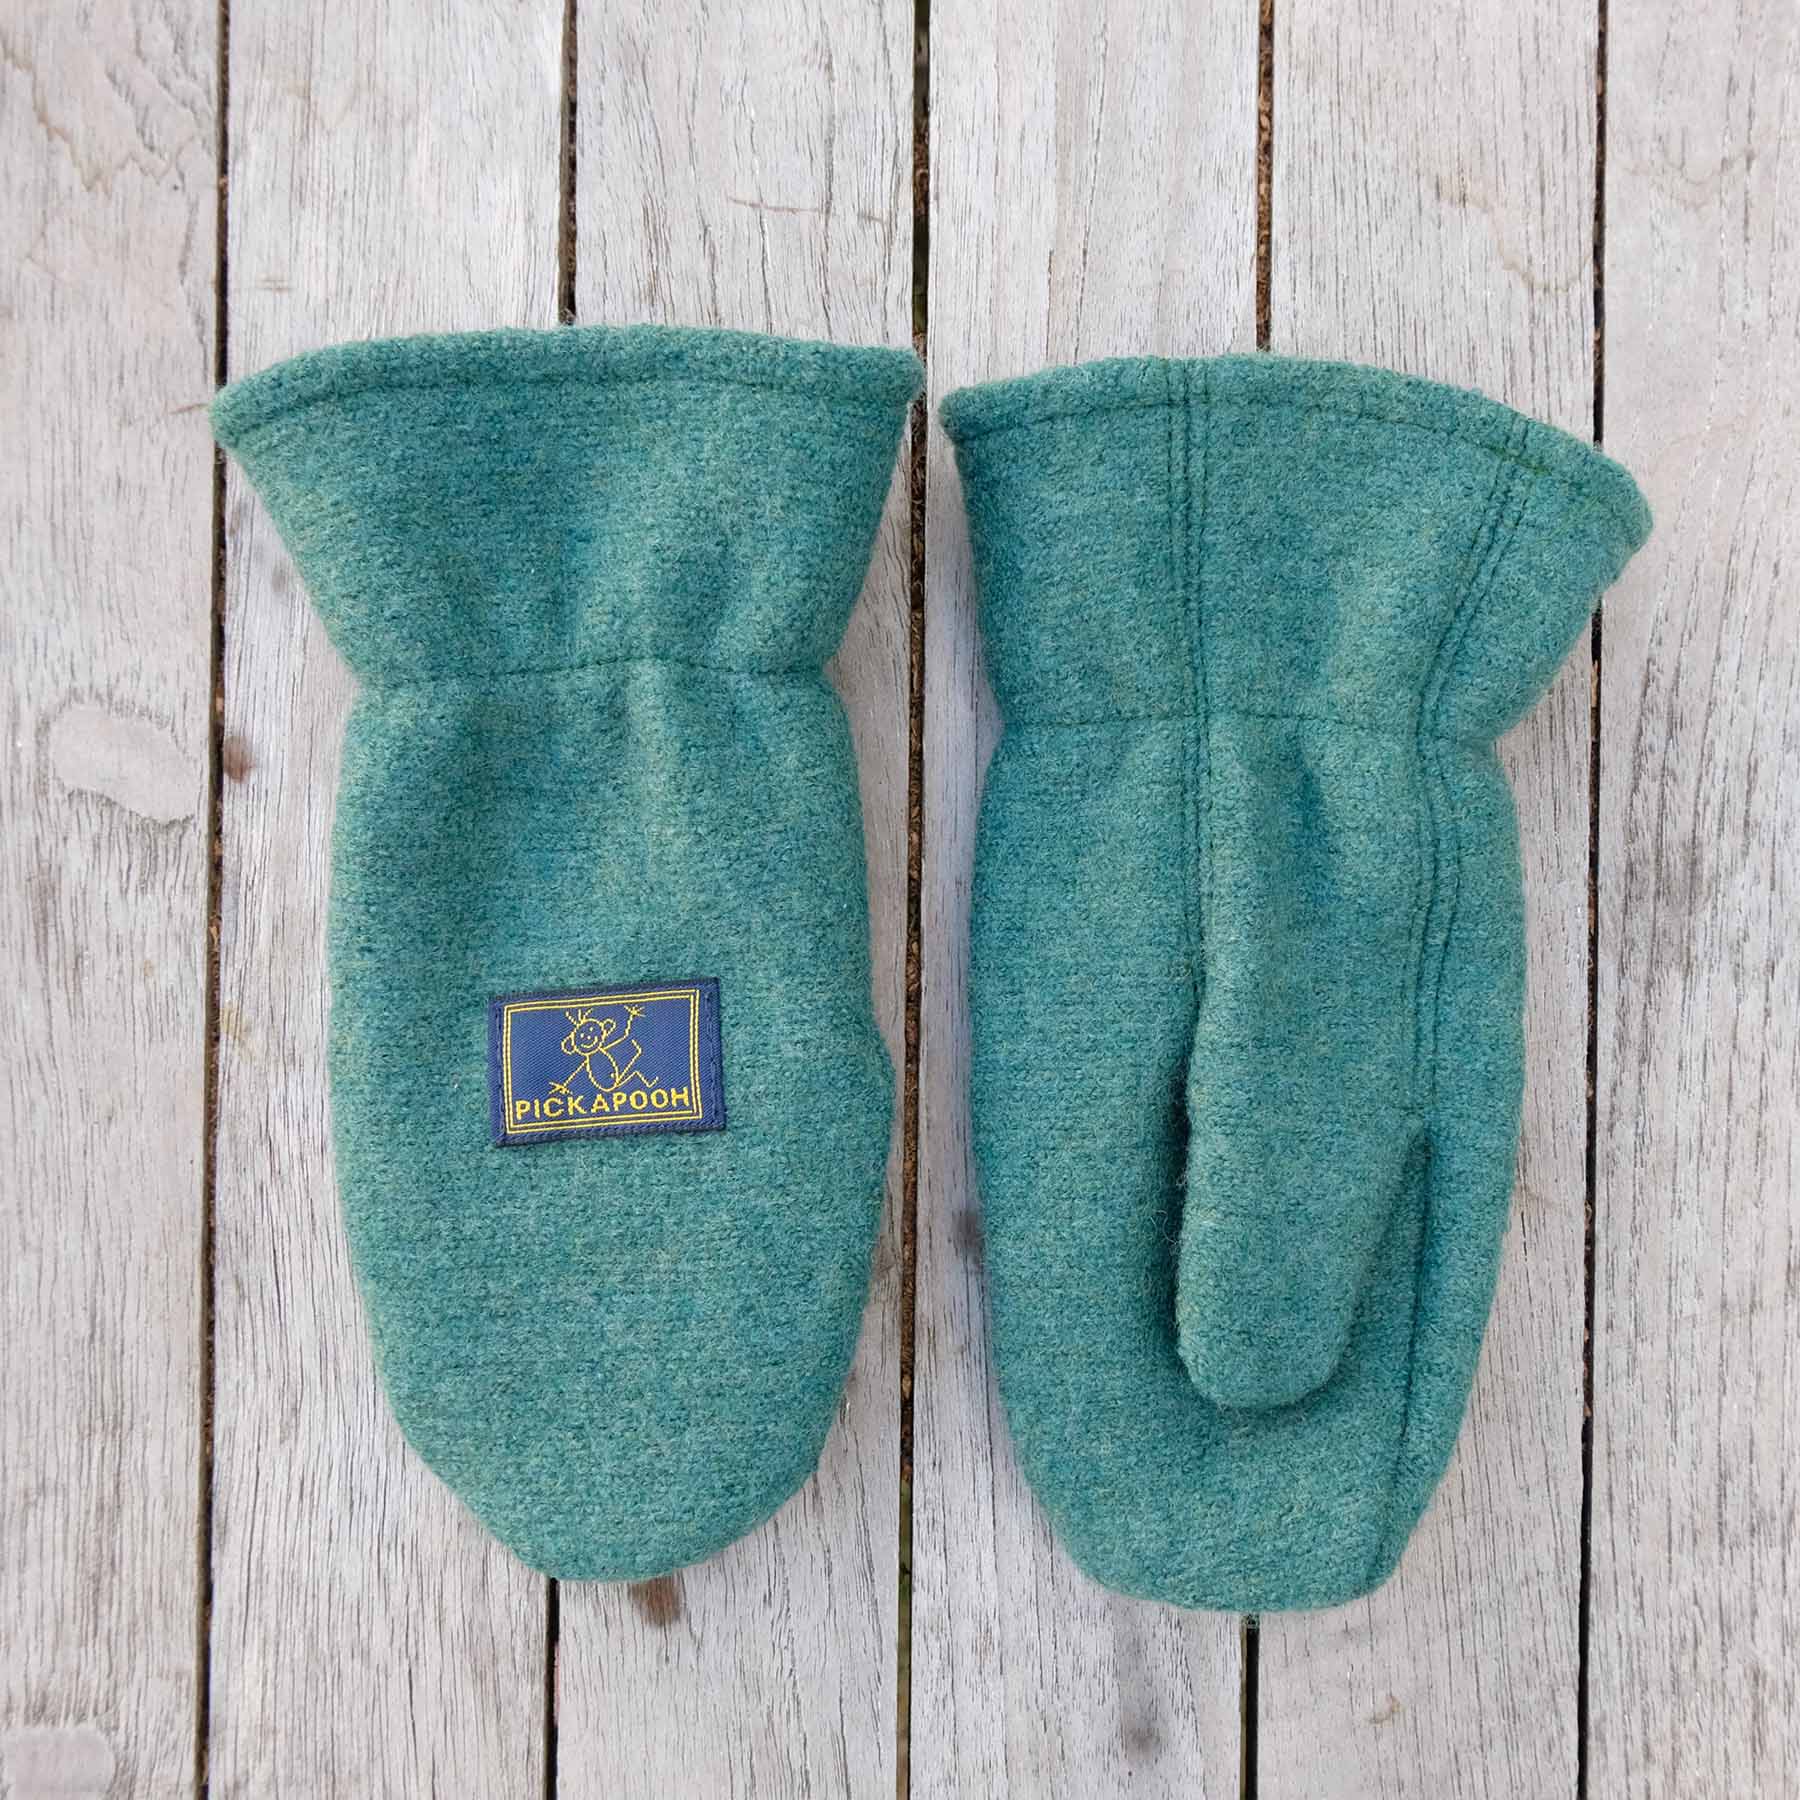 Mittens In Boiled Merino With Wool/Silk Lining [198] - £23.00 ...